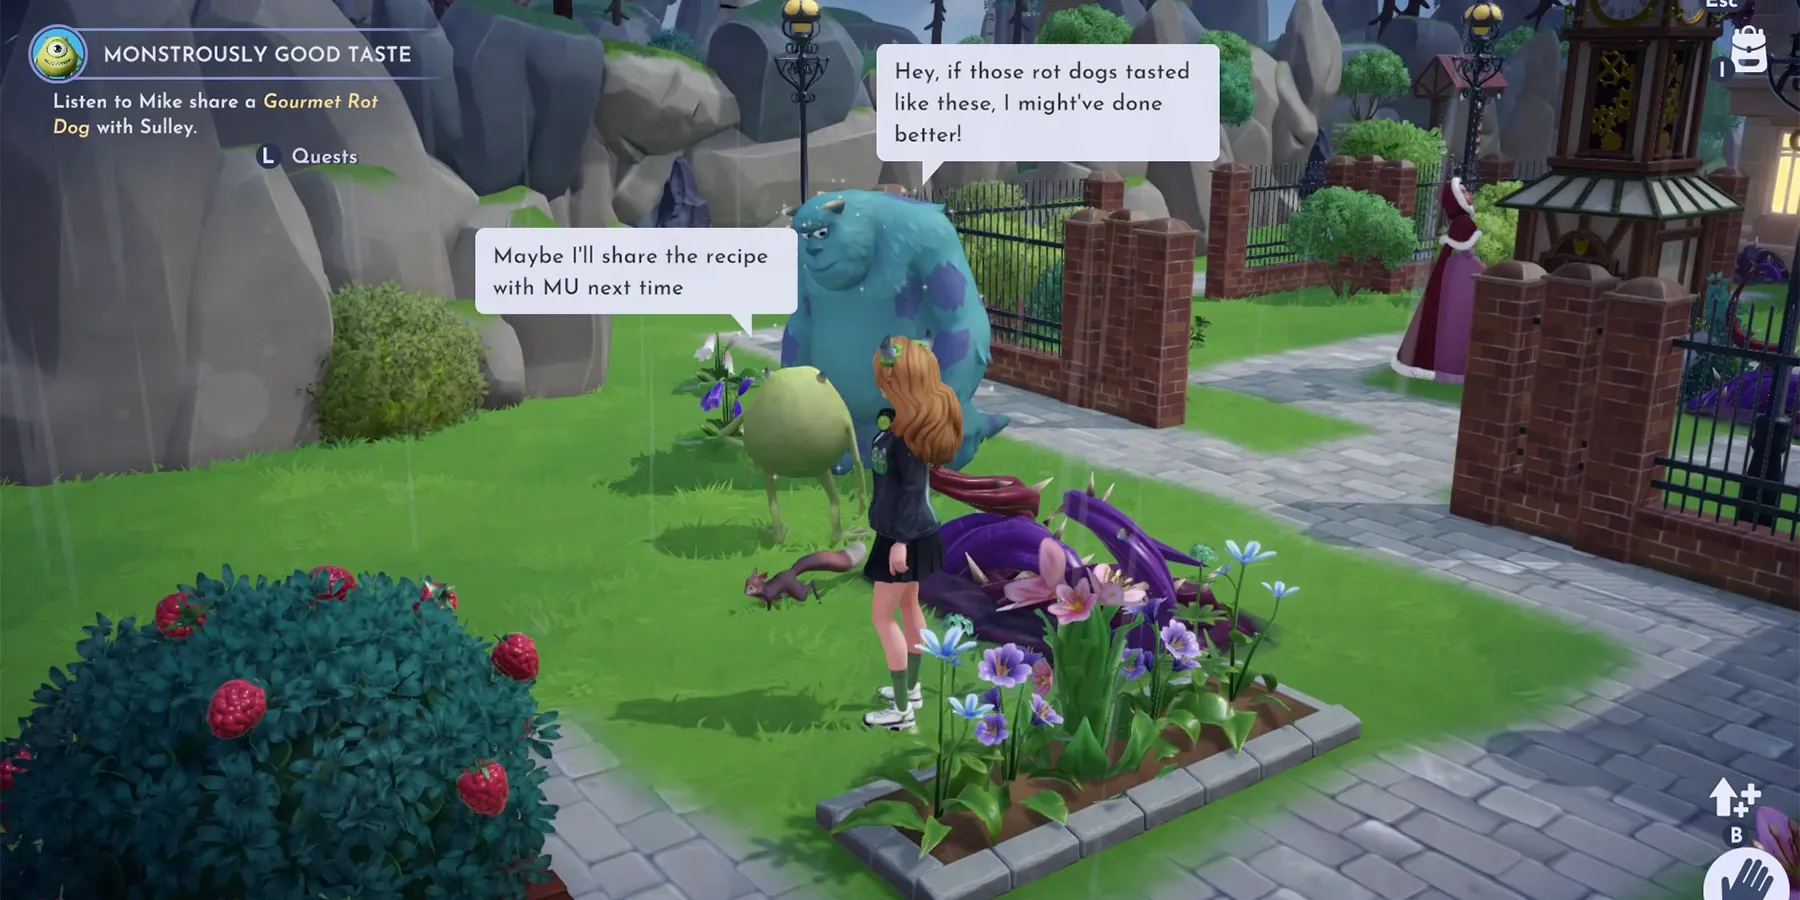 Mike speaking with Sulley in Disney Dreamlight Valley